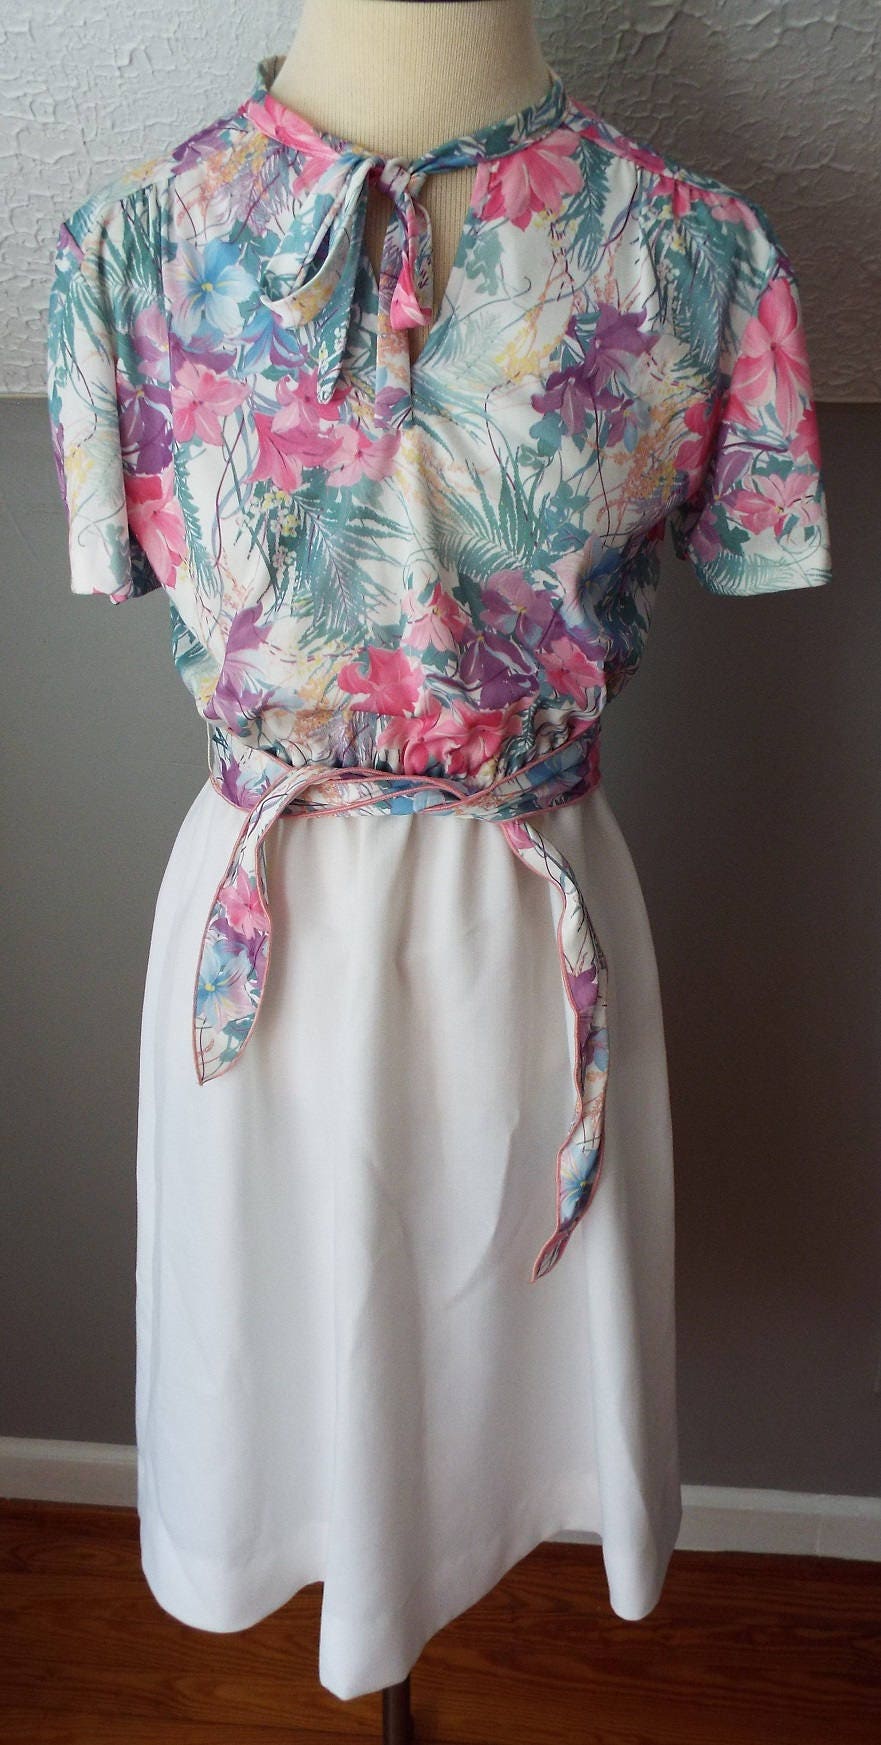 Vintage Short Sleeve Dress with Colorful Floral Print